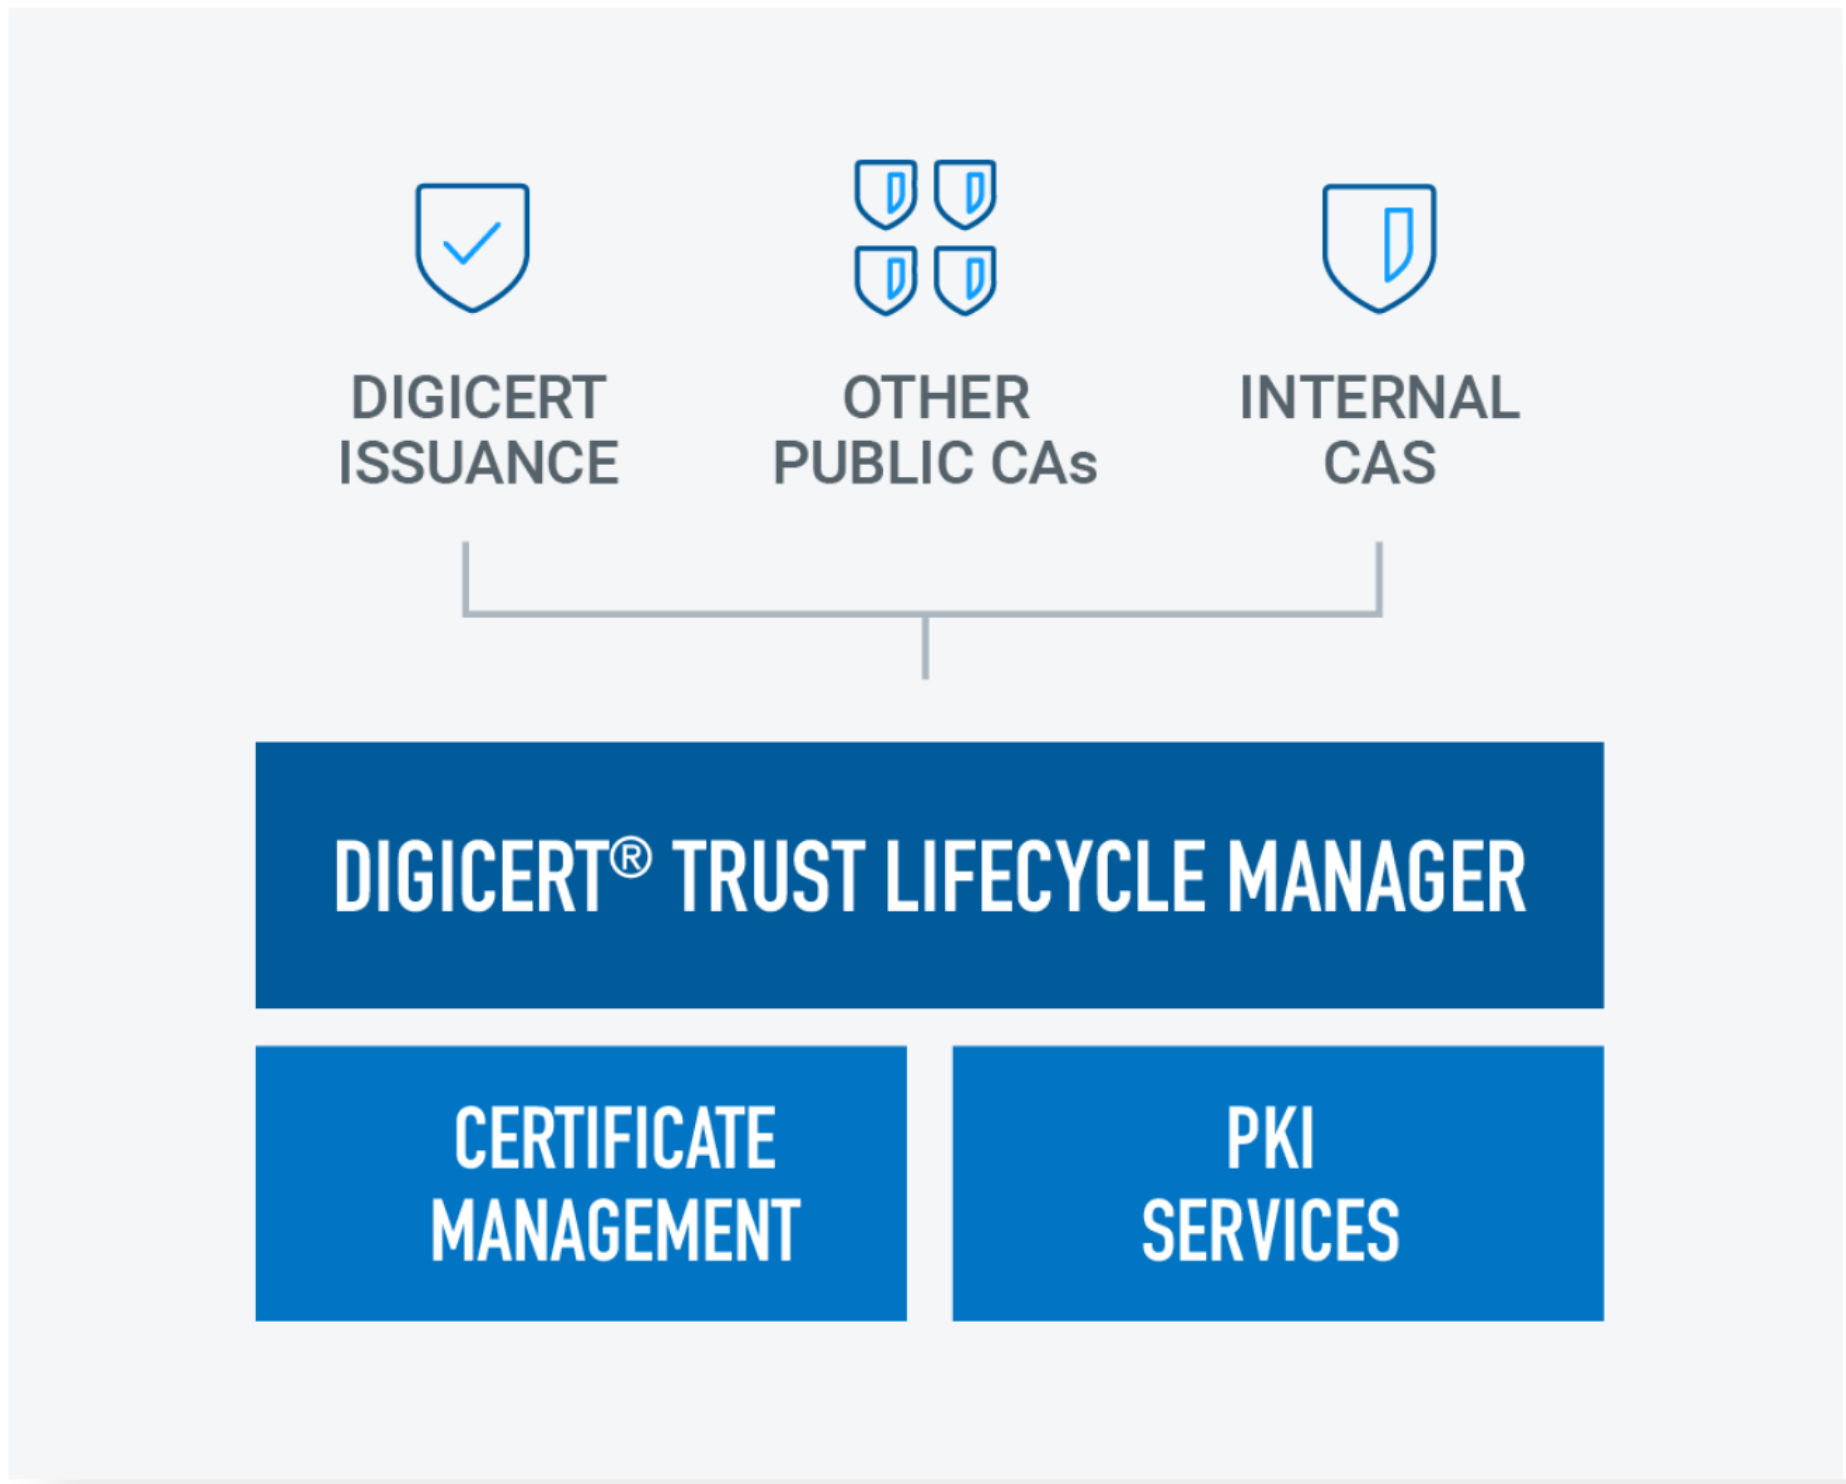 DigiCert® Trust Lifecycle Manager